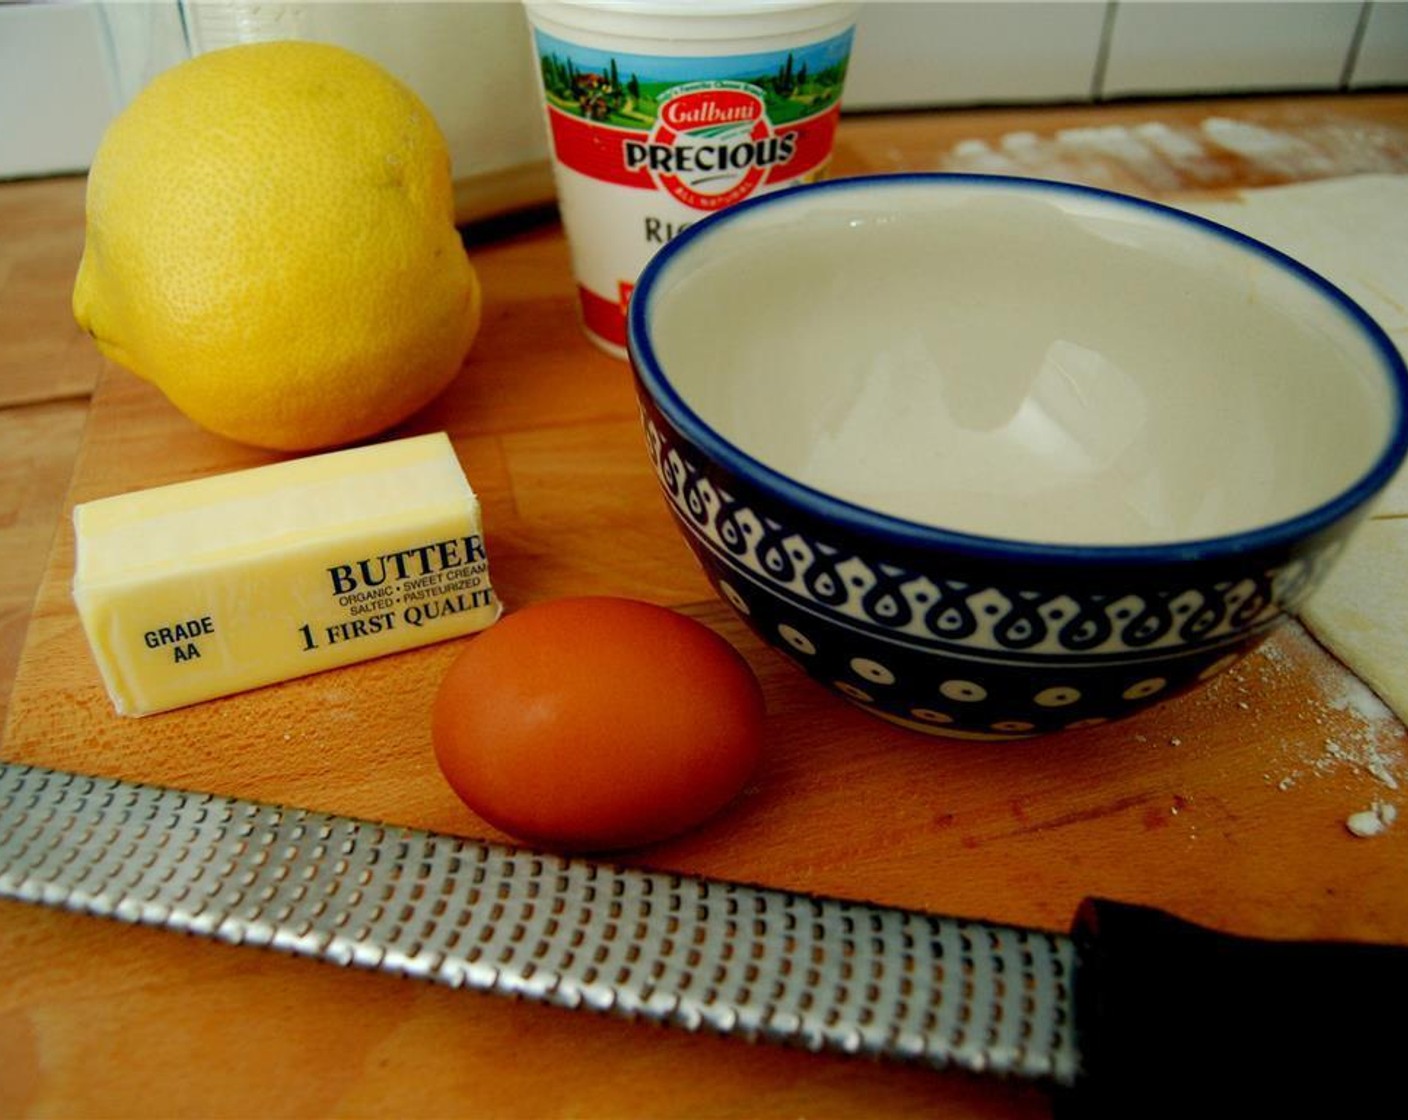 step 2 Mix together the Ricotta Cheese (1 cup), Granulated Sugar (1/3 cup), zest from Lemon (1) and Salt (1 pinch).